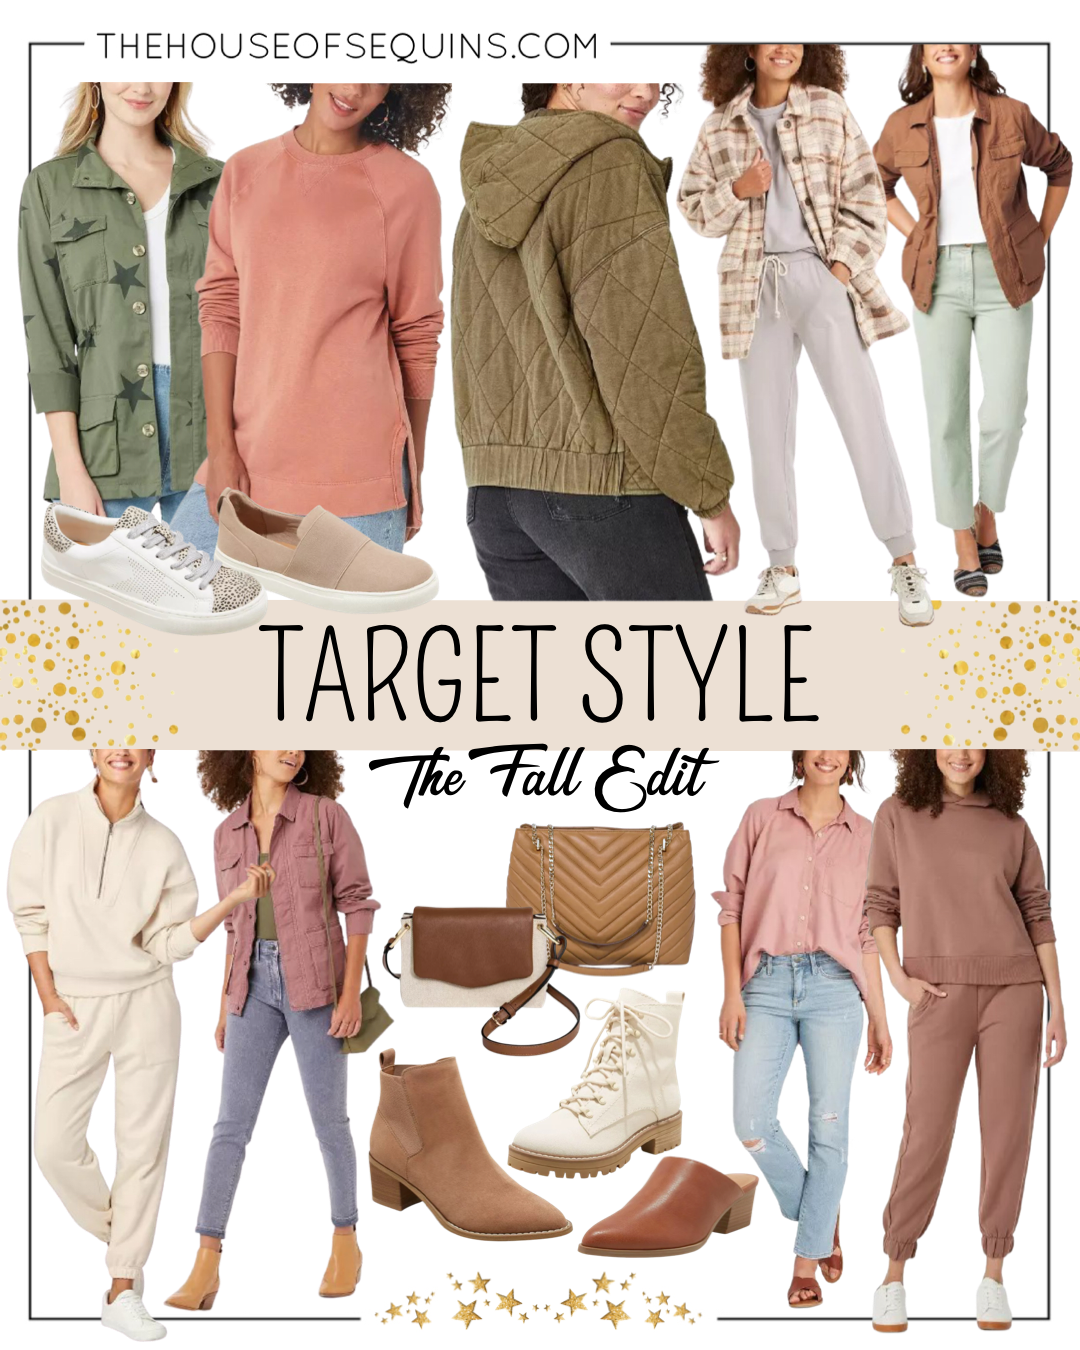 Blogger Sarah Lindner of The House of Sequins sharing Fall looks from Target.